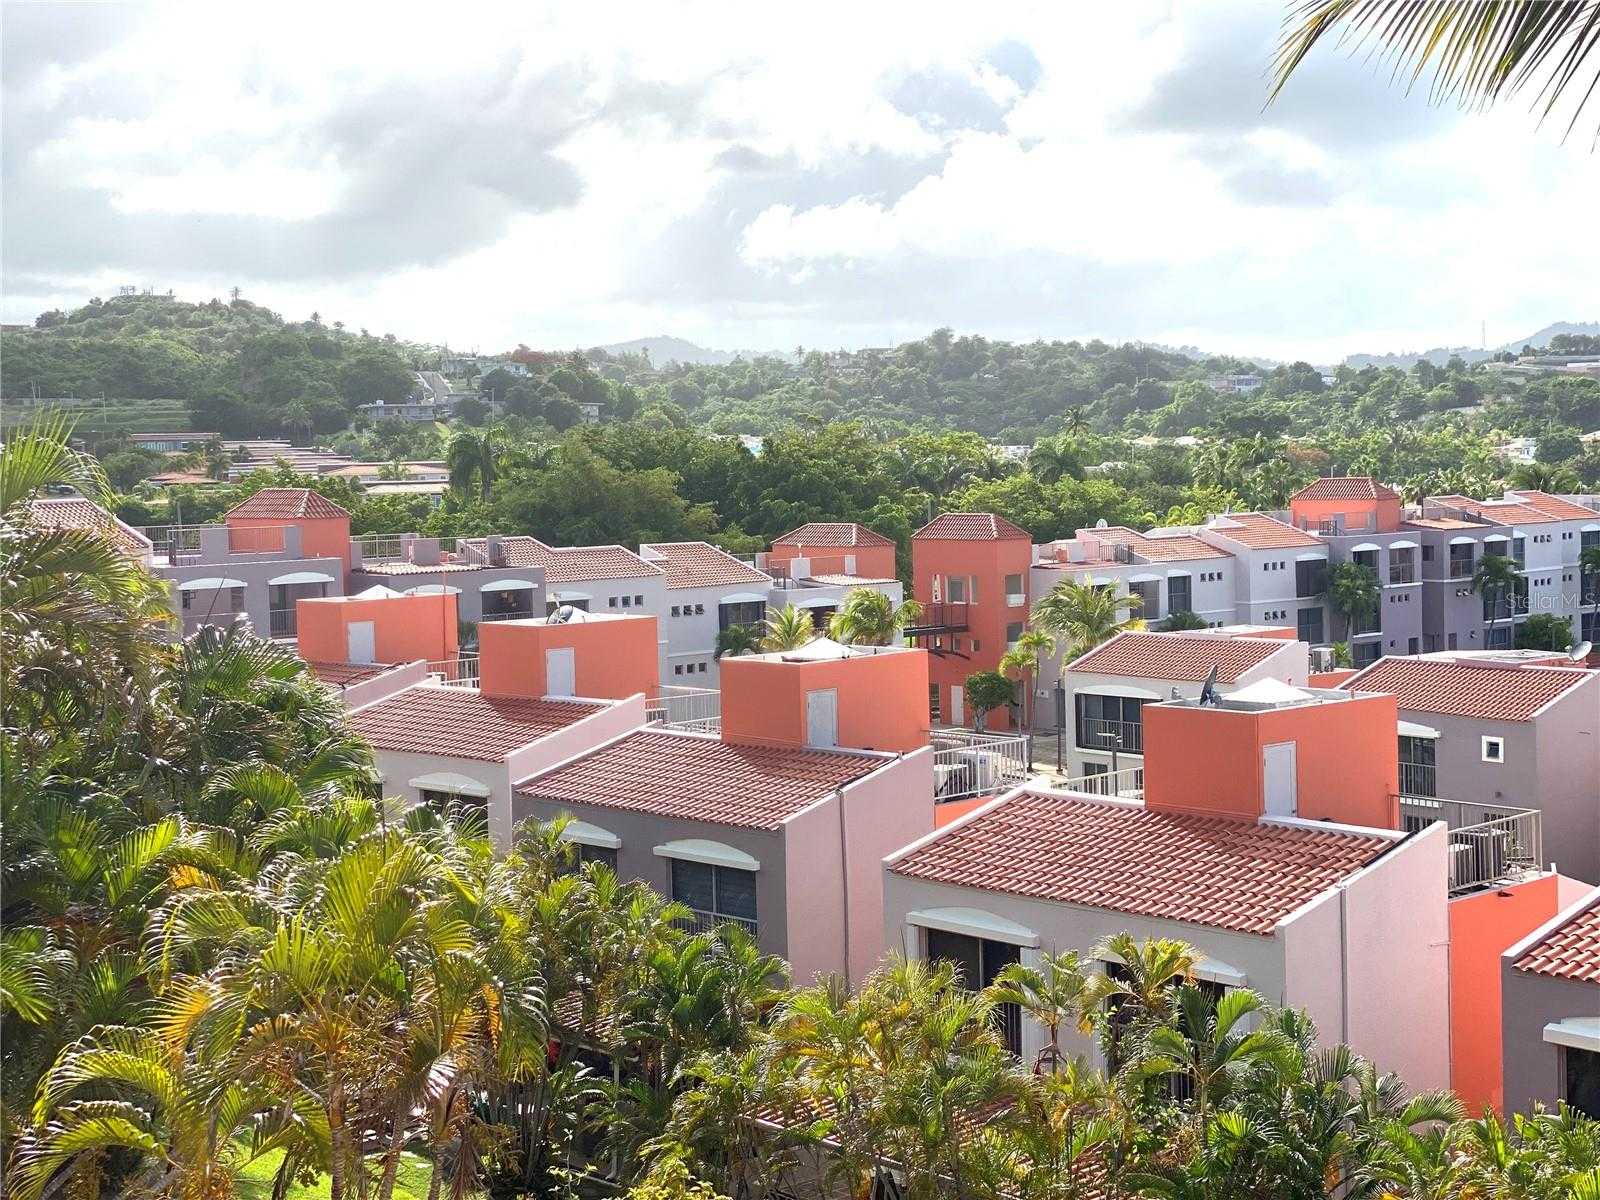 View HUMACAO, 00791 townhome